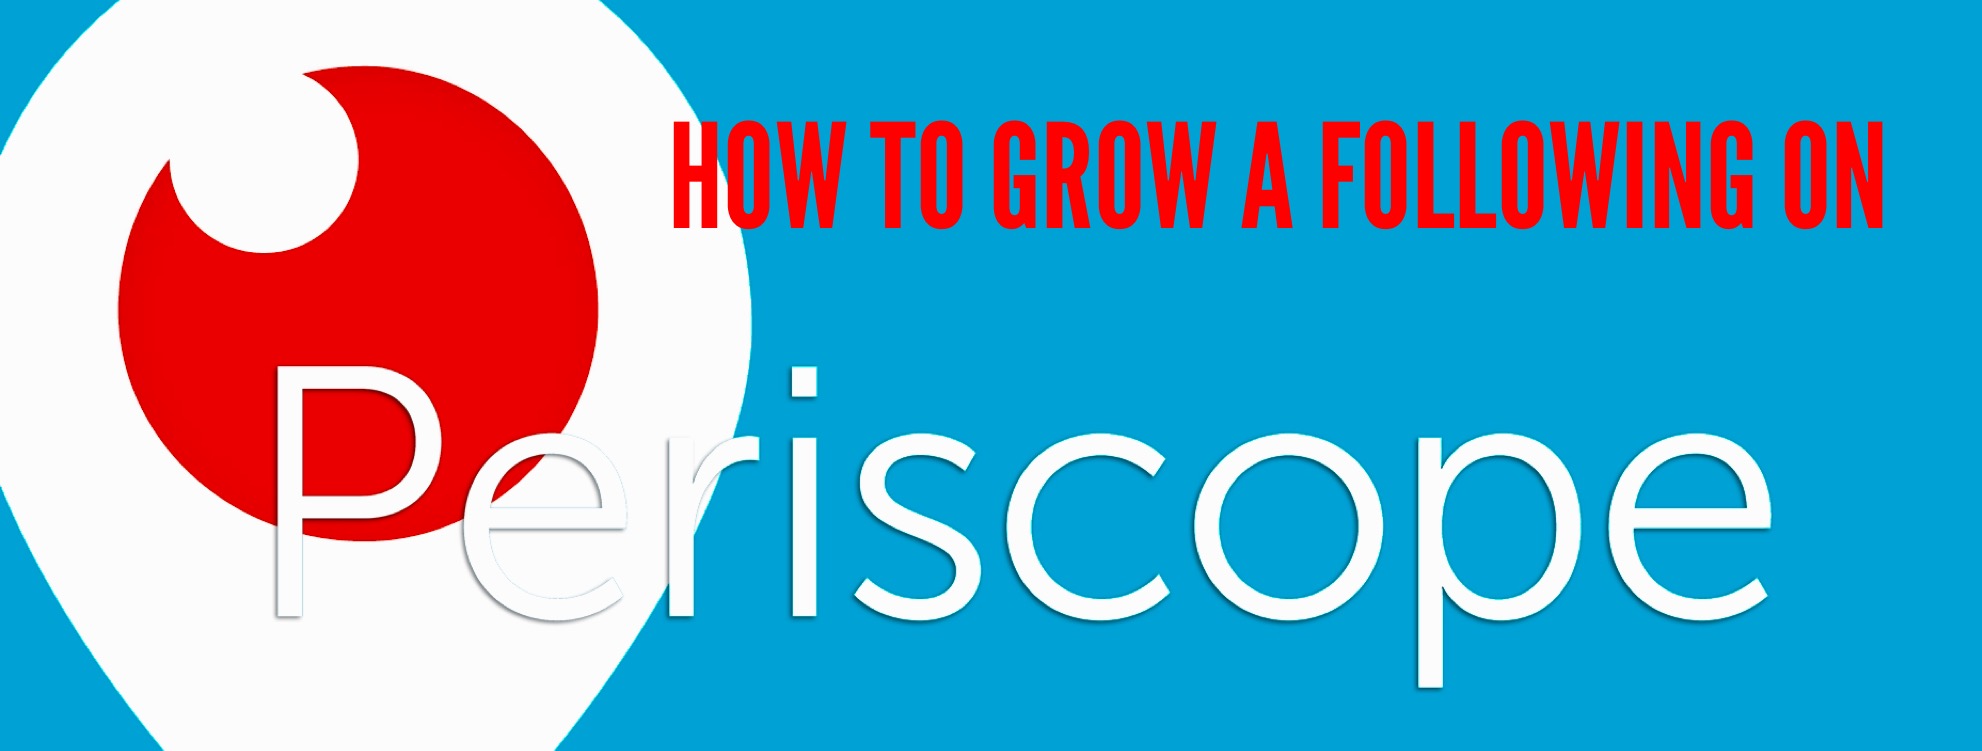 Periscope for actors - How to grow a following